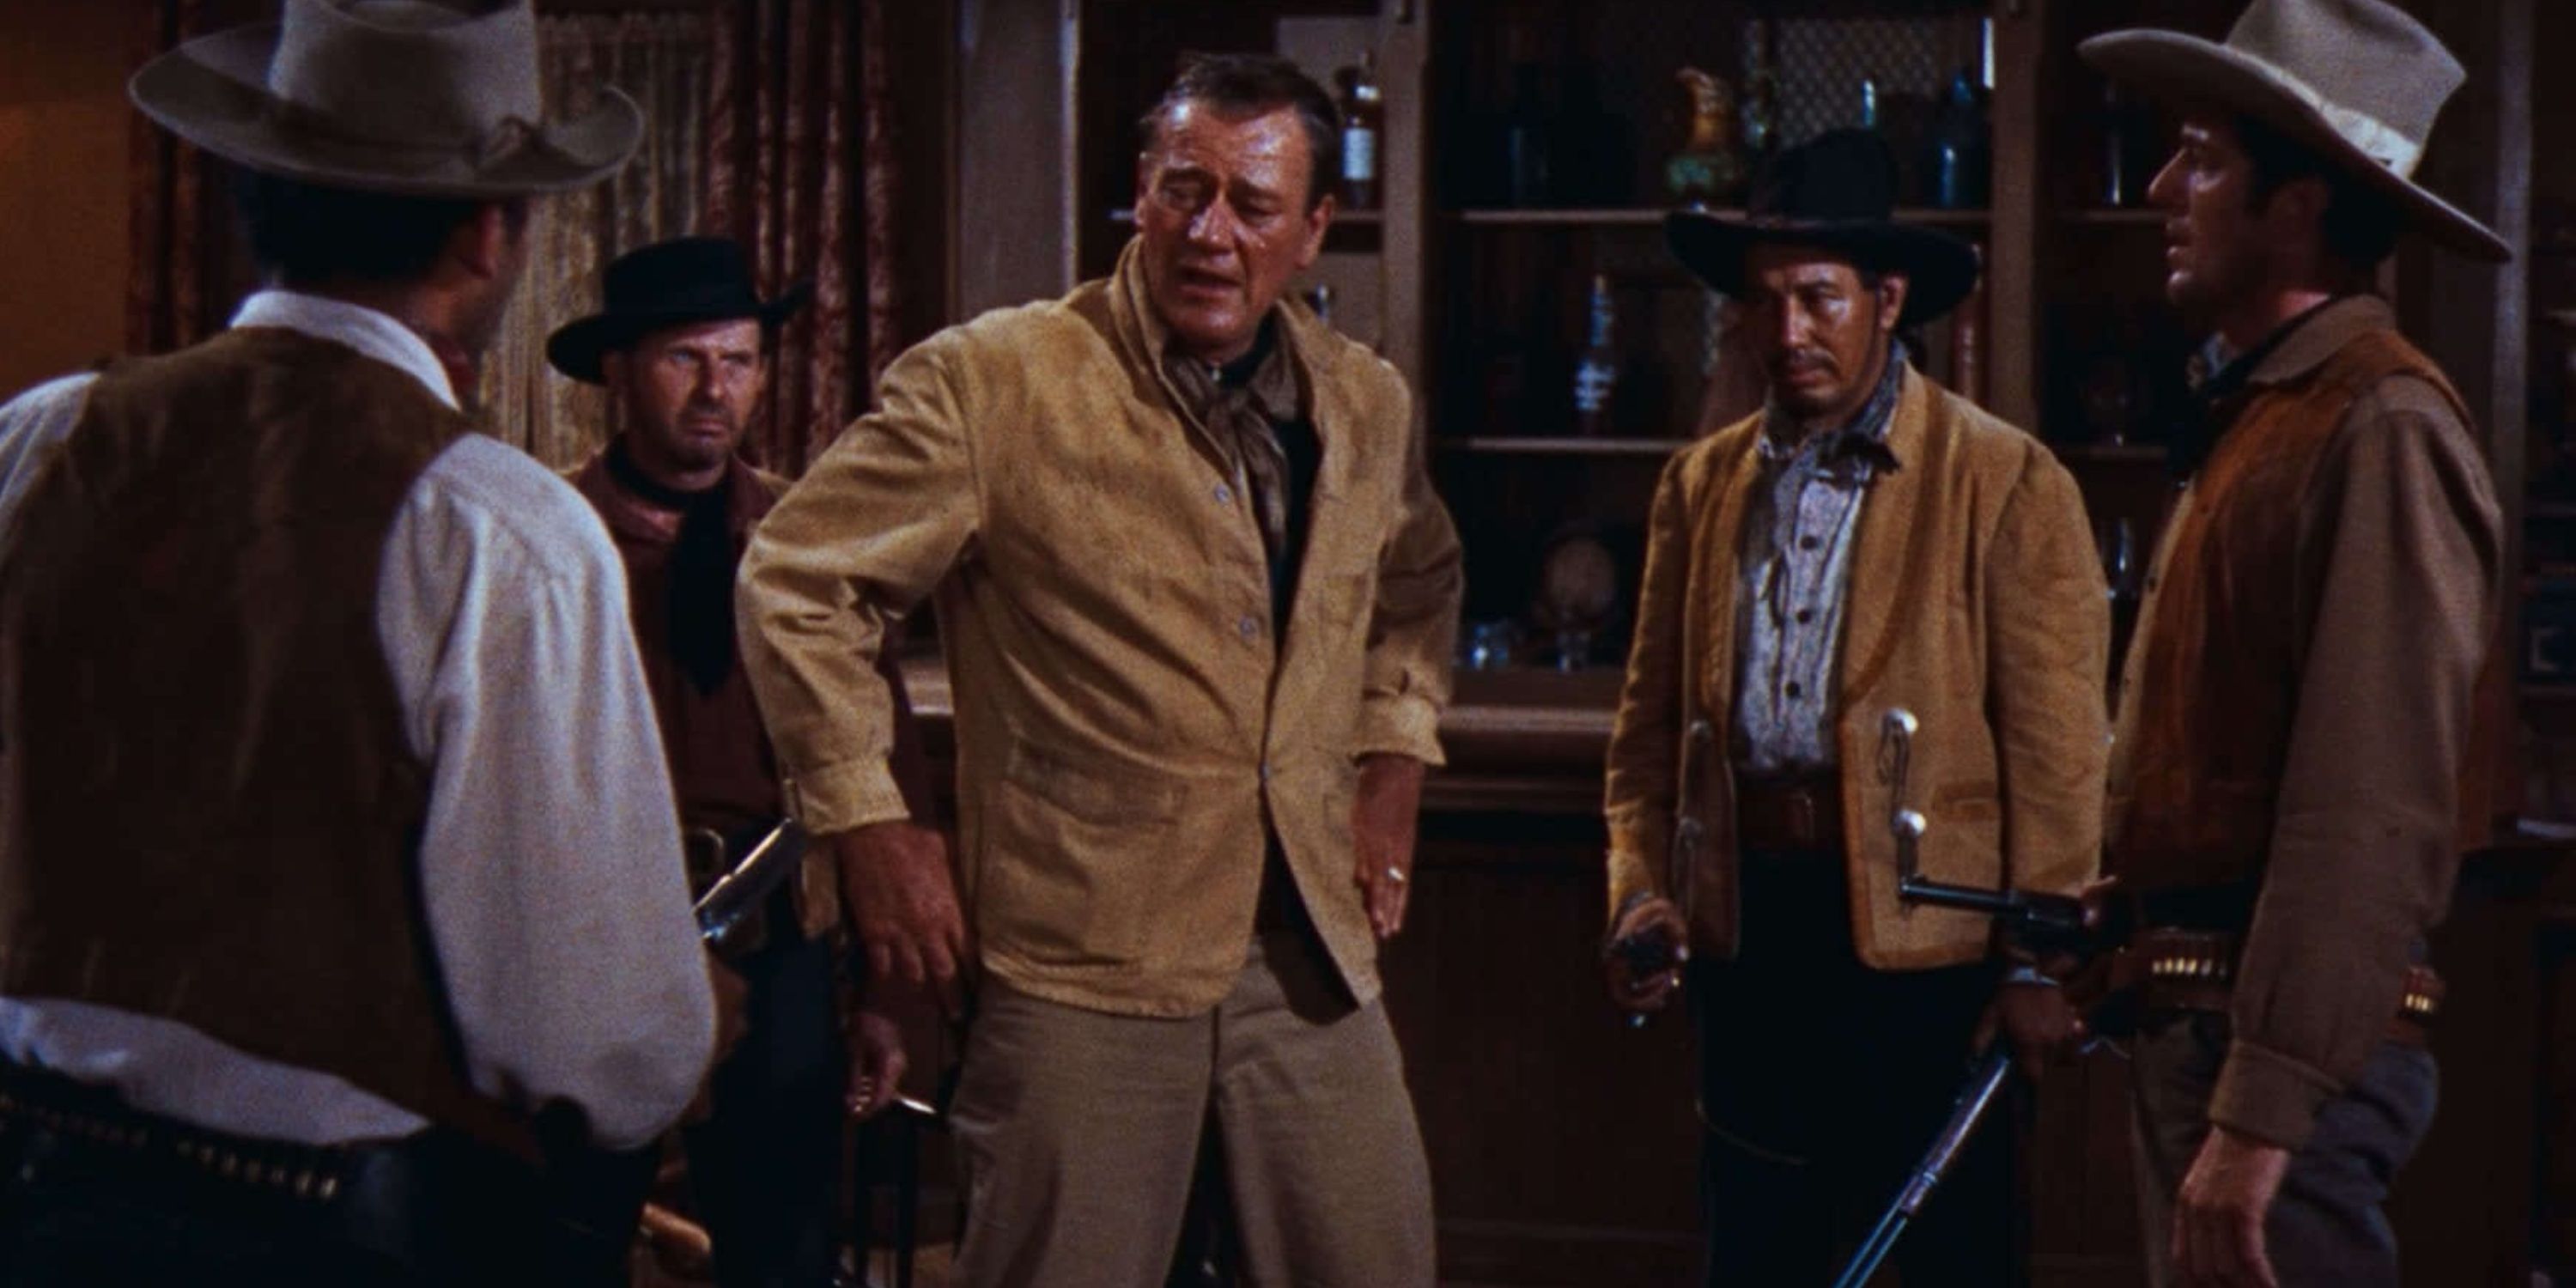 Sheriff John Chance is surrounded by gunfighters in a bar in Rio Bravo